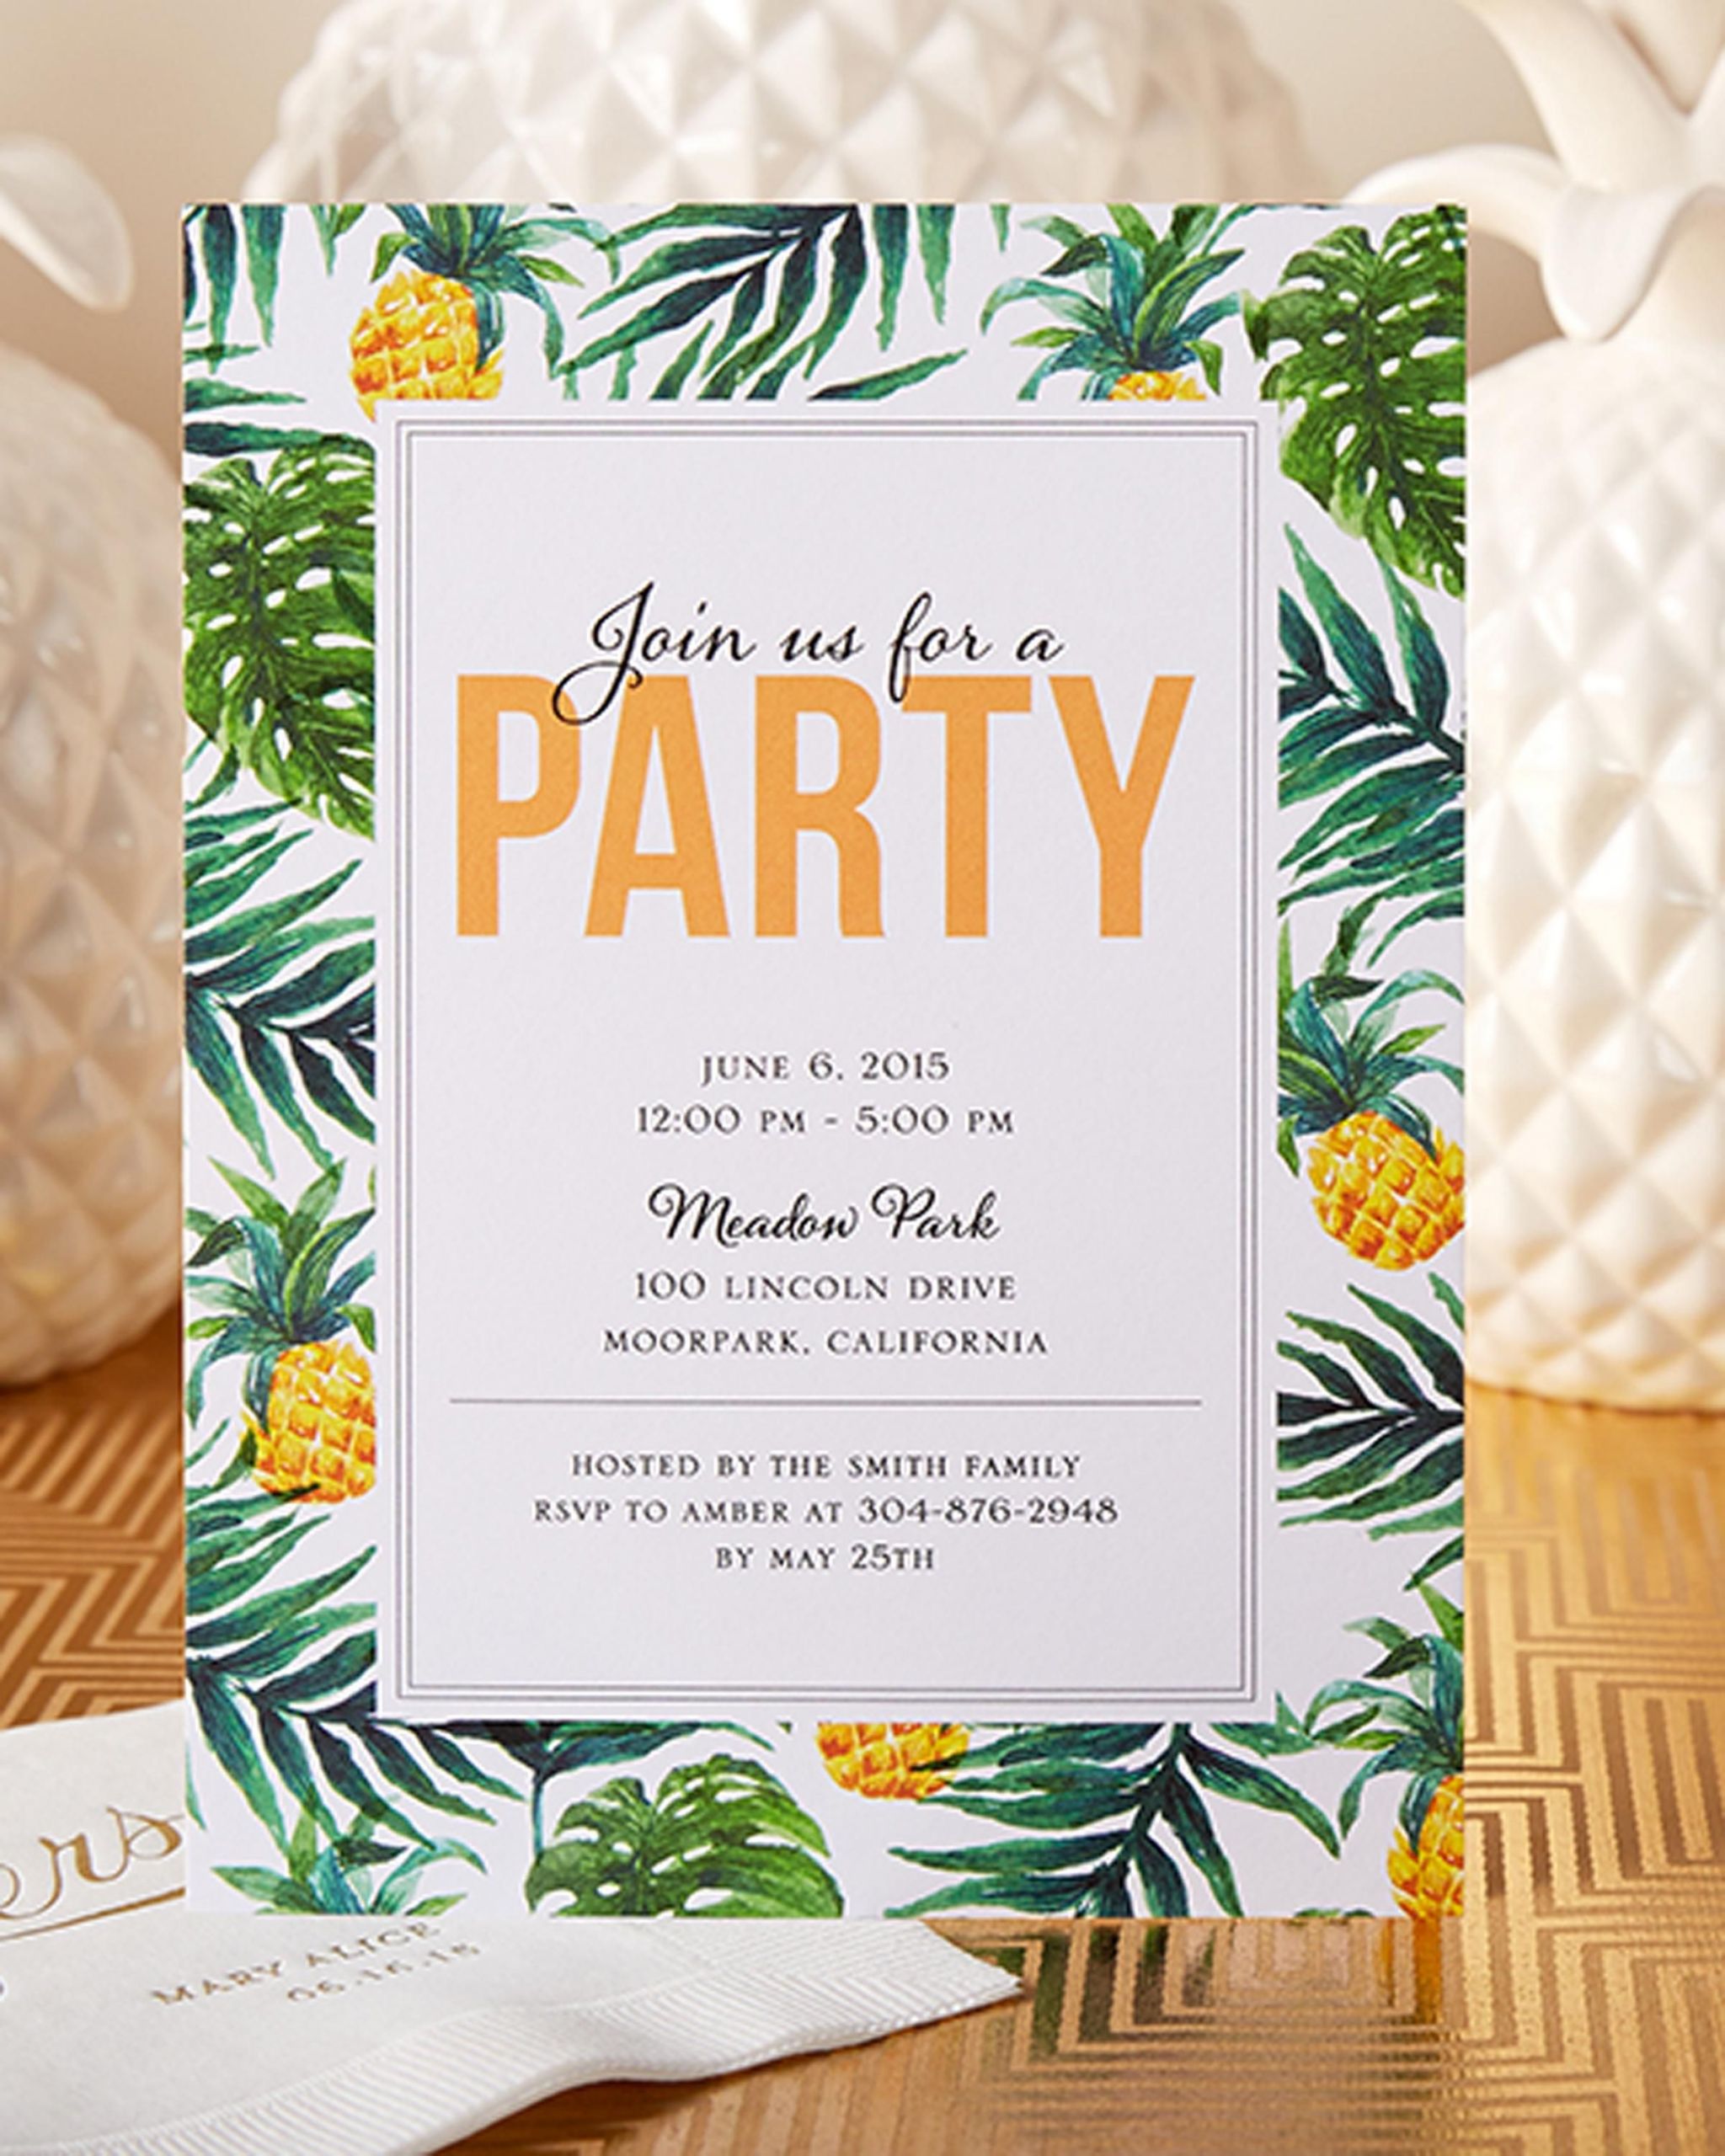 Summer Party Invitation Ideas
 Have your friends join you for a tropical party this